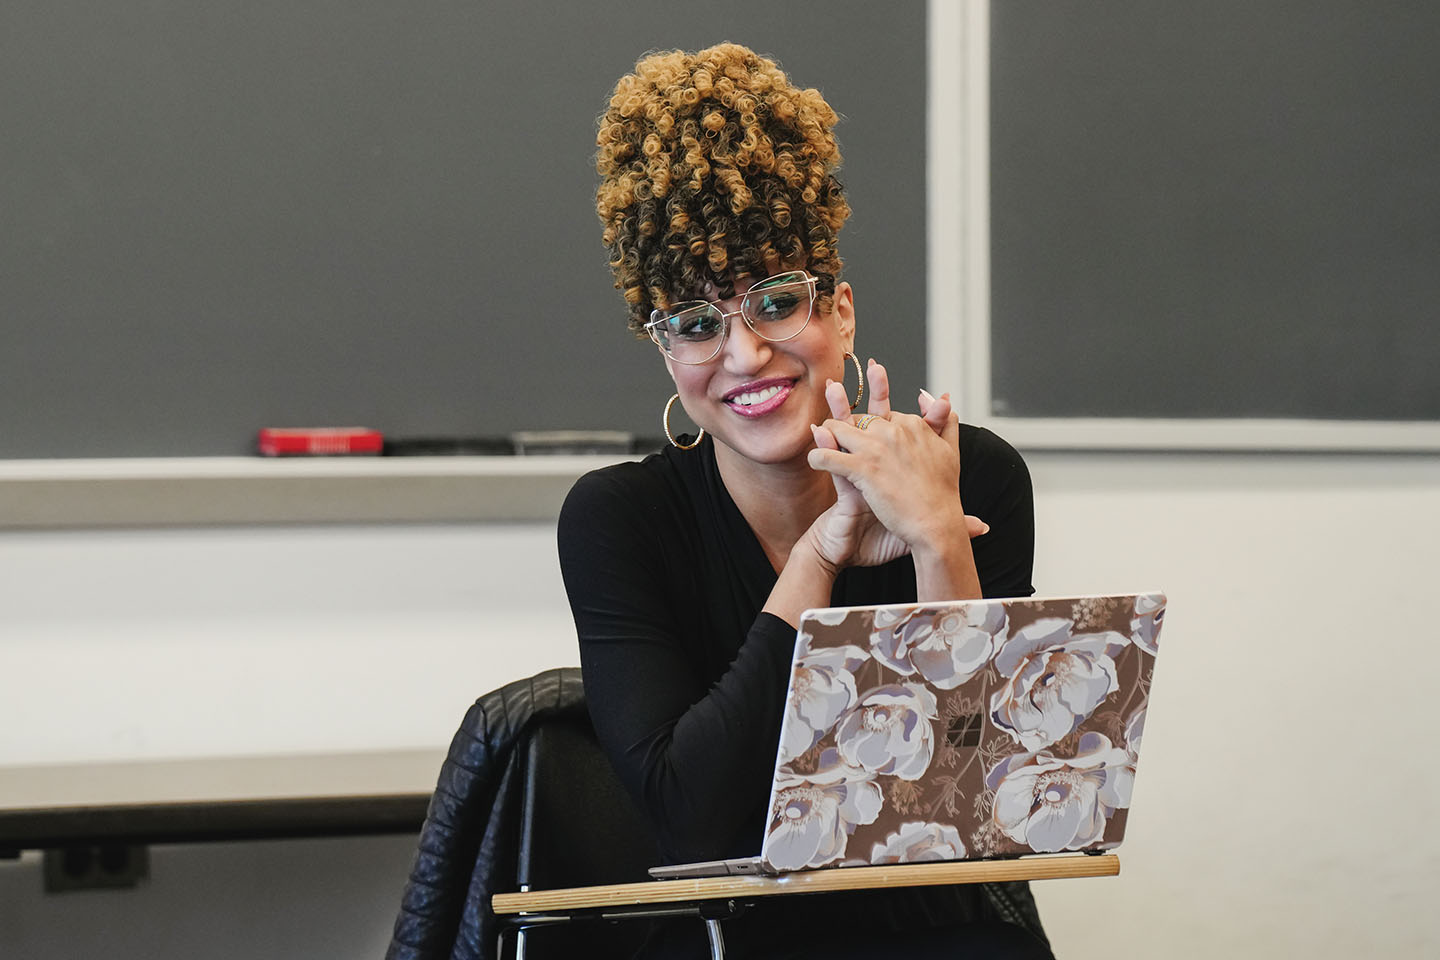 A college professor sits in front of her class with a laptop open on the desk in front of her